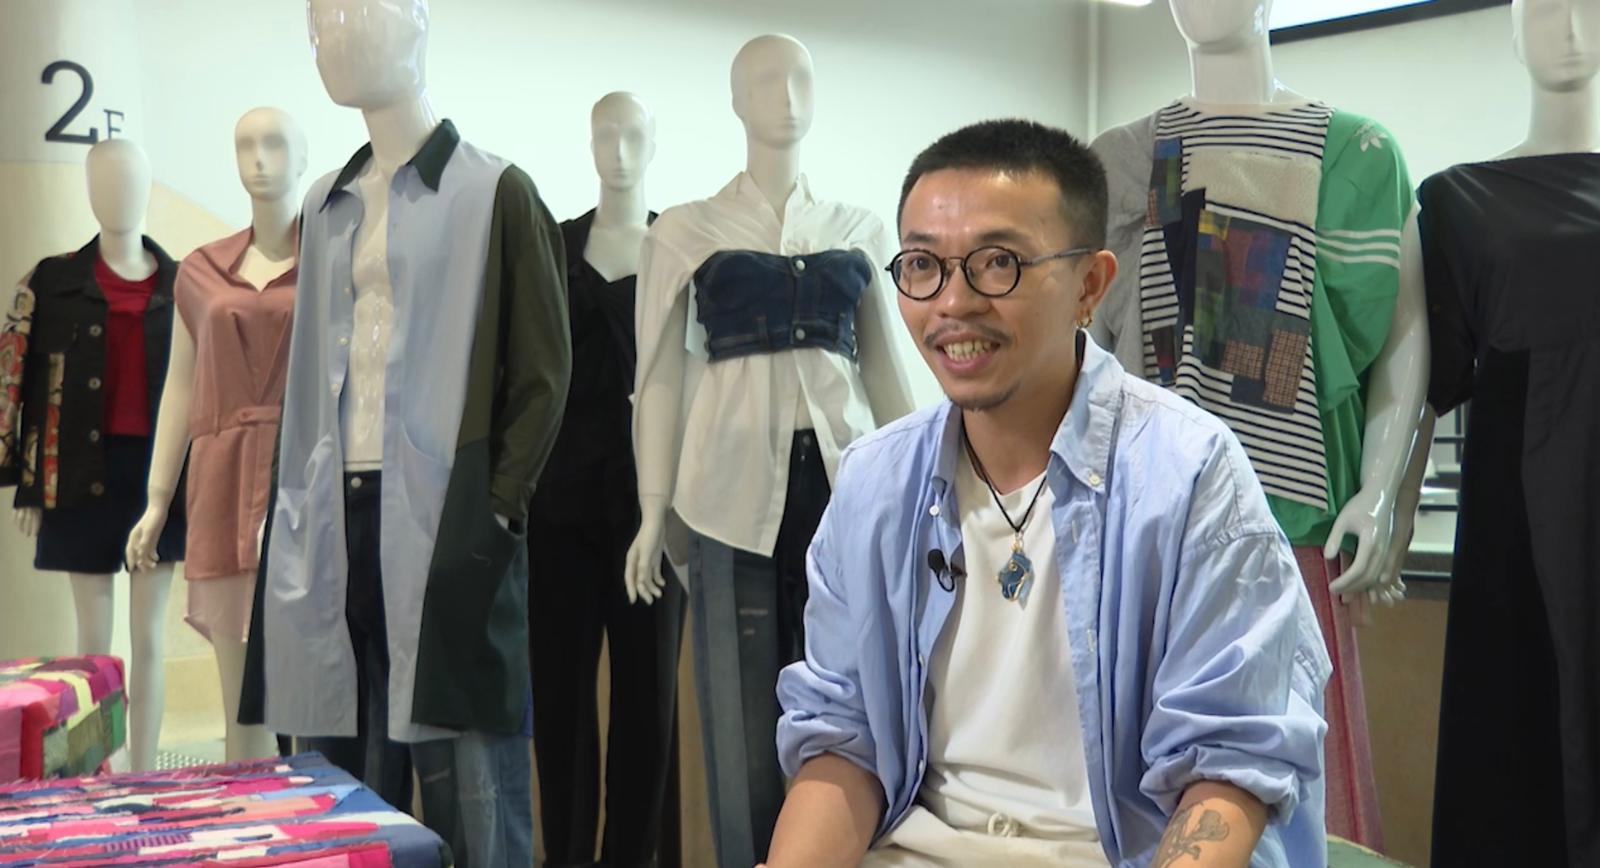 Fashion designer Matt Hui talked about his new sustainable collection.